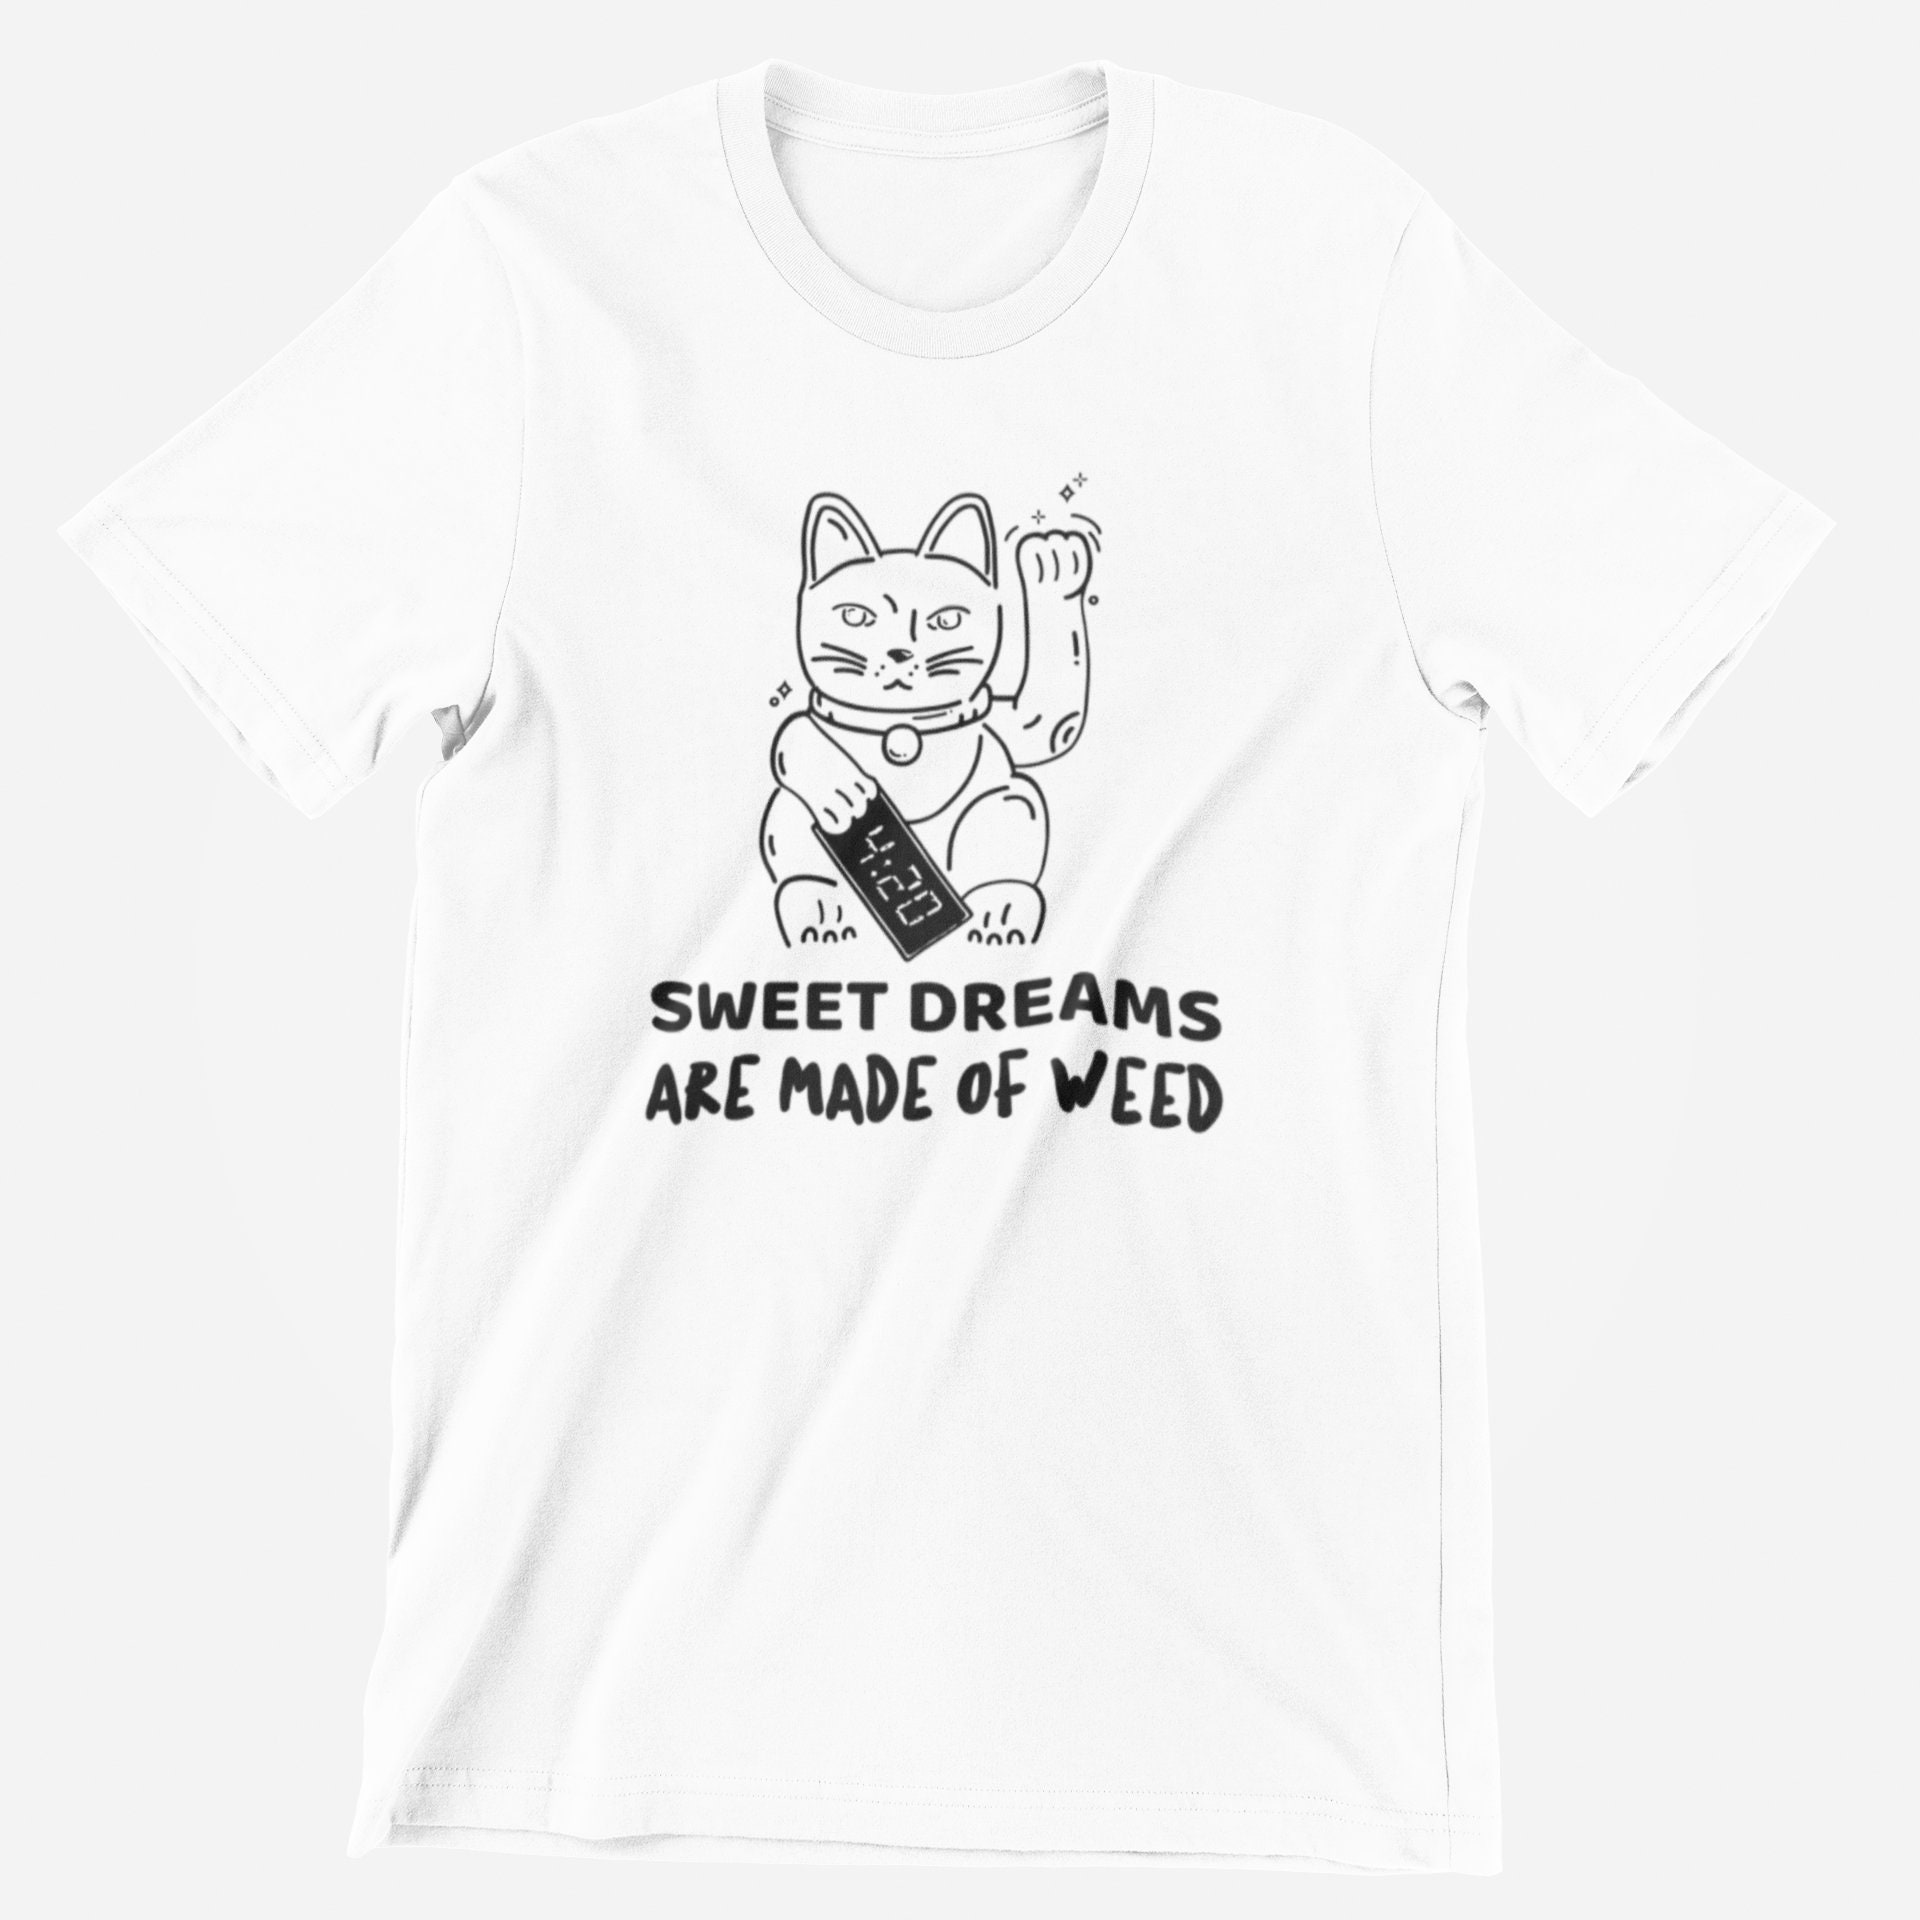 Sweet dreams are made of weed Short-Sleeve Unisex T-Shirt